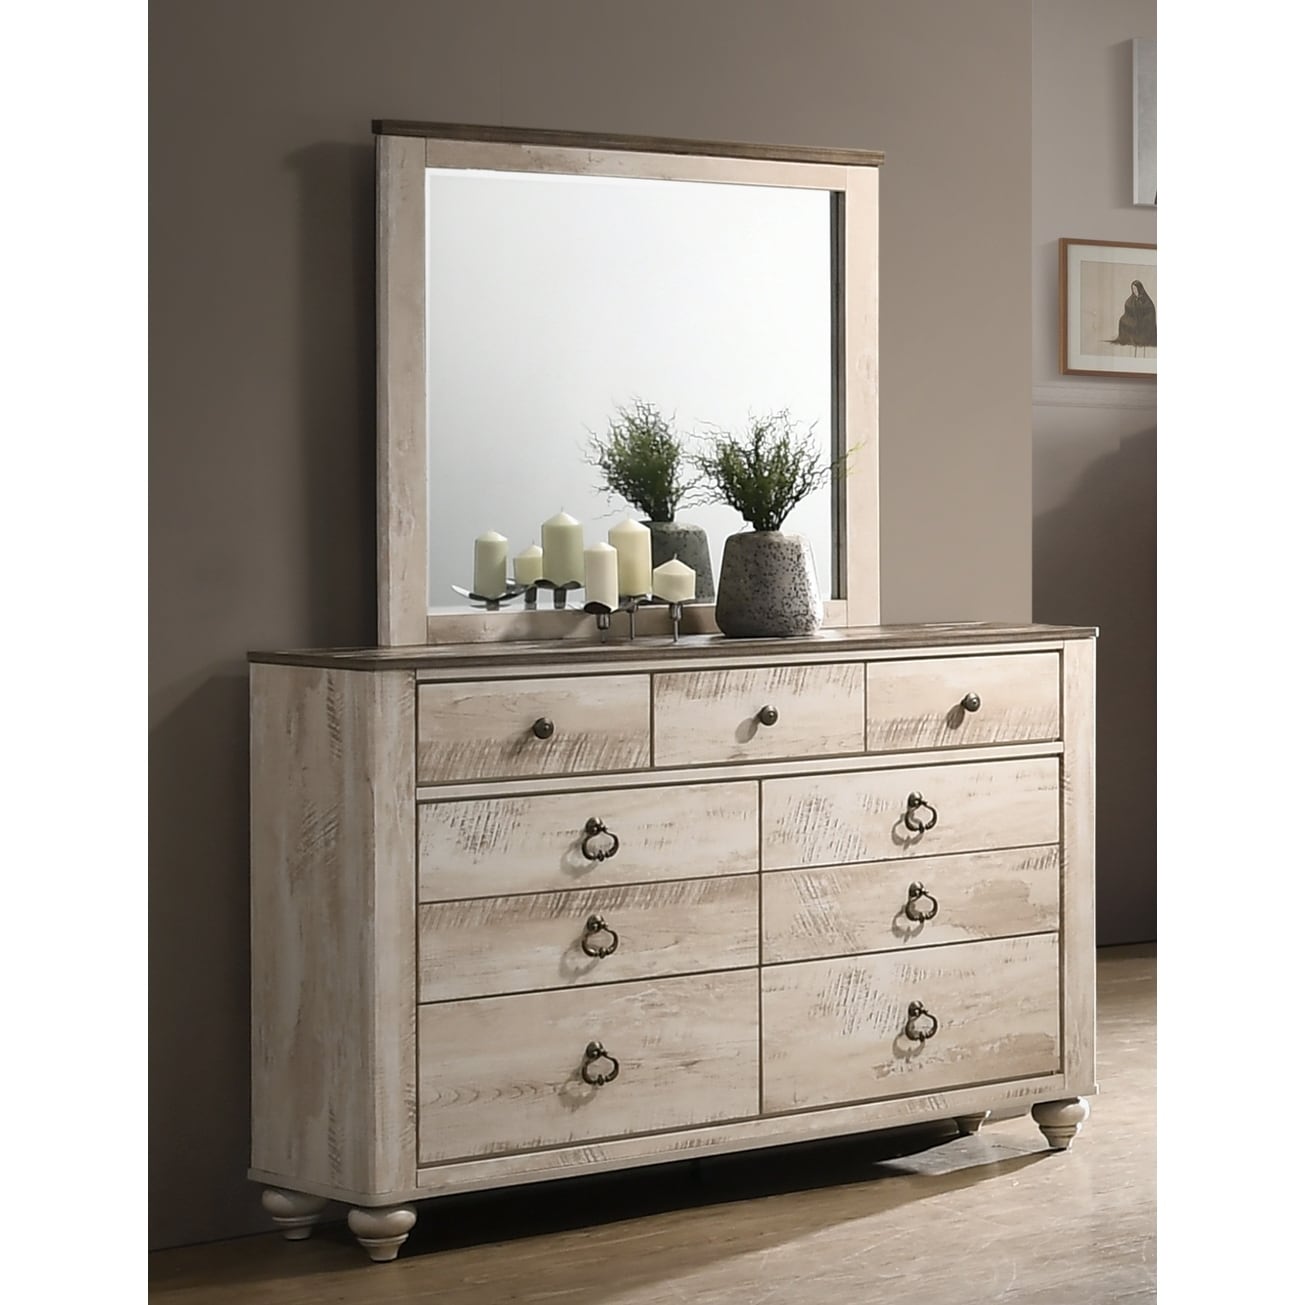 Shop Imerland Contemporary White Wash Patched Wood Top Dresser